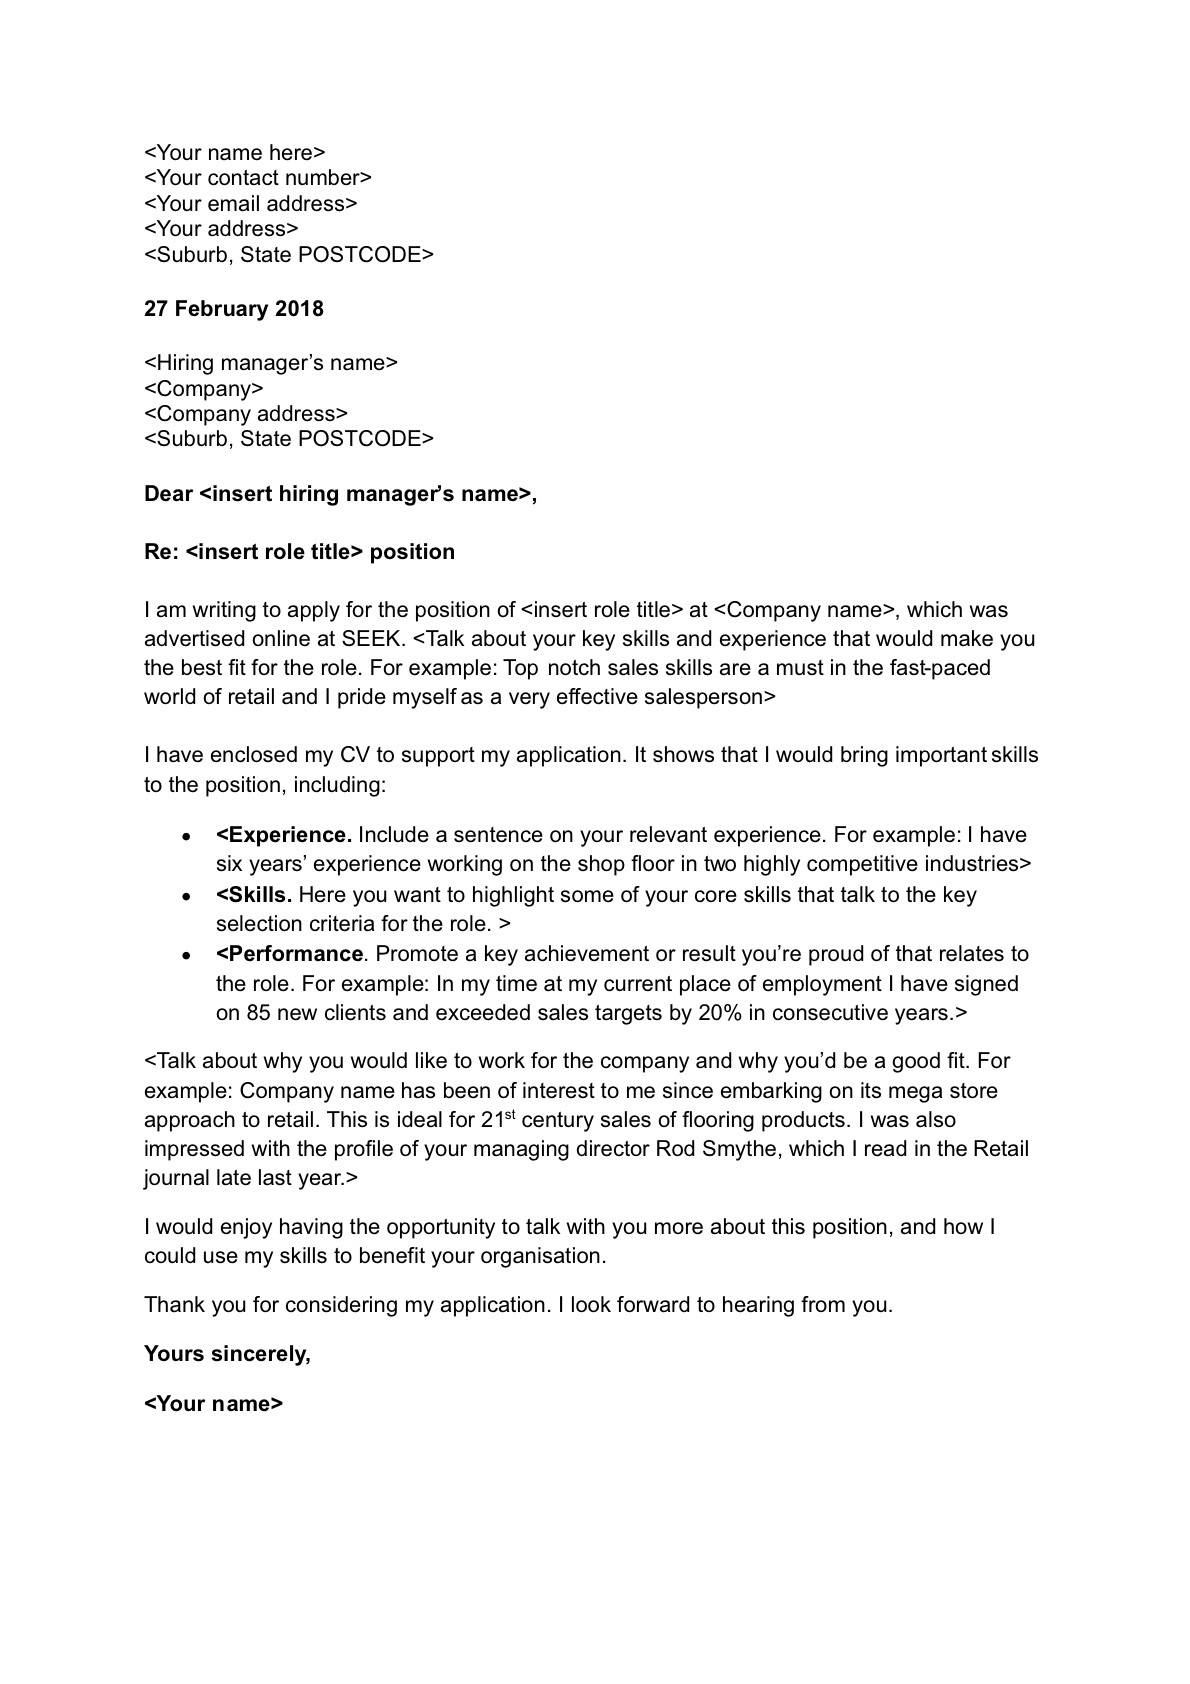 General Cover Letter Sample from seekconz.corewebdna.net.au